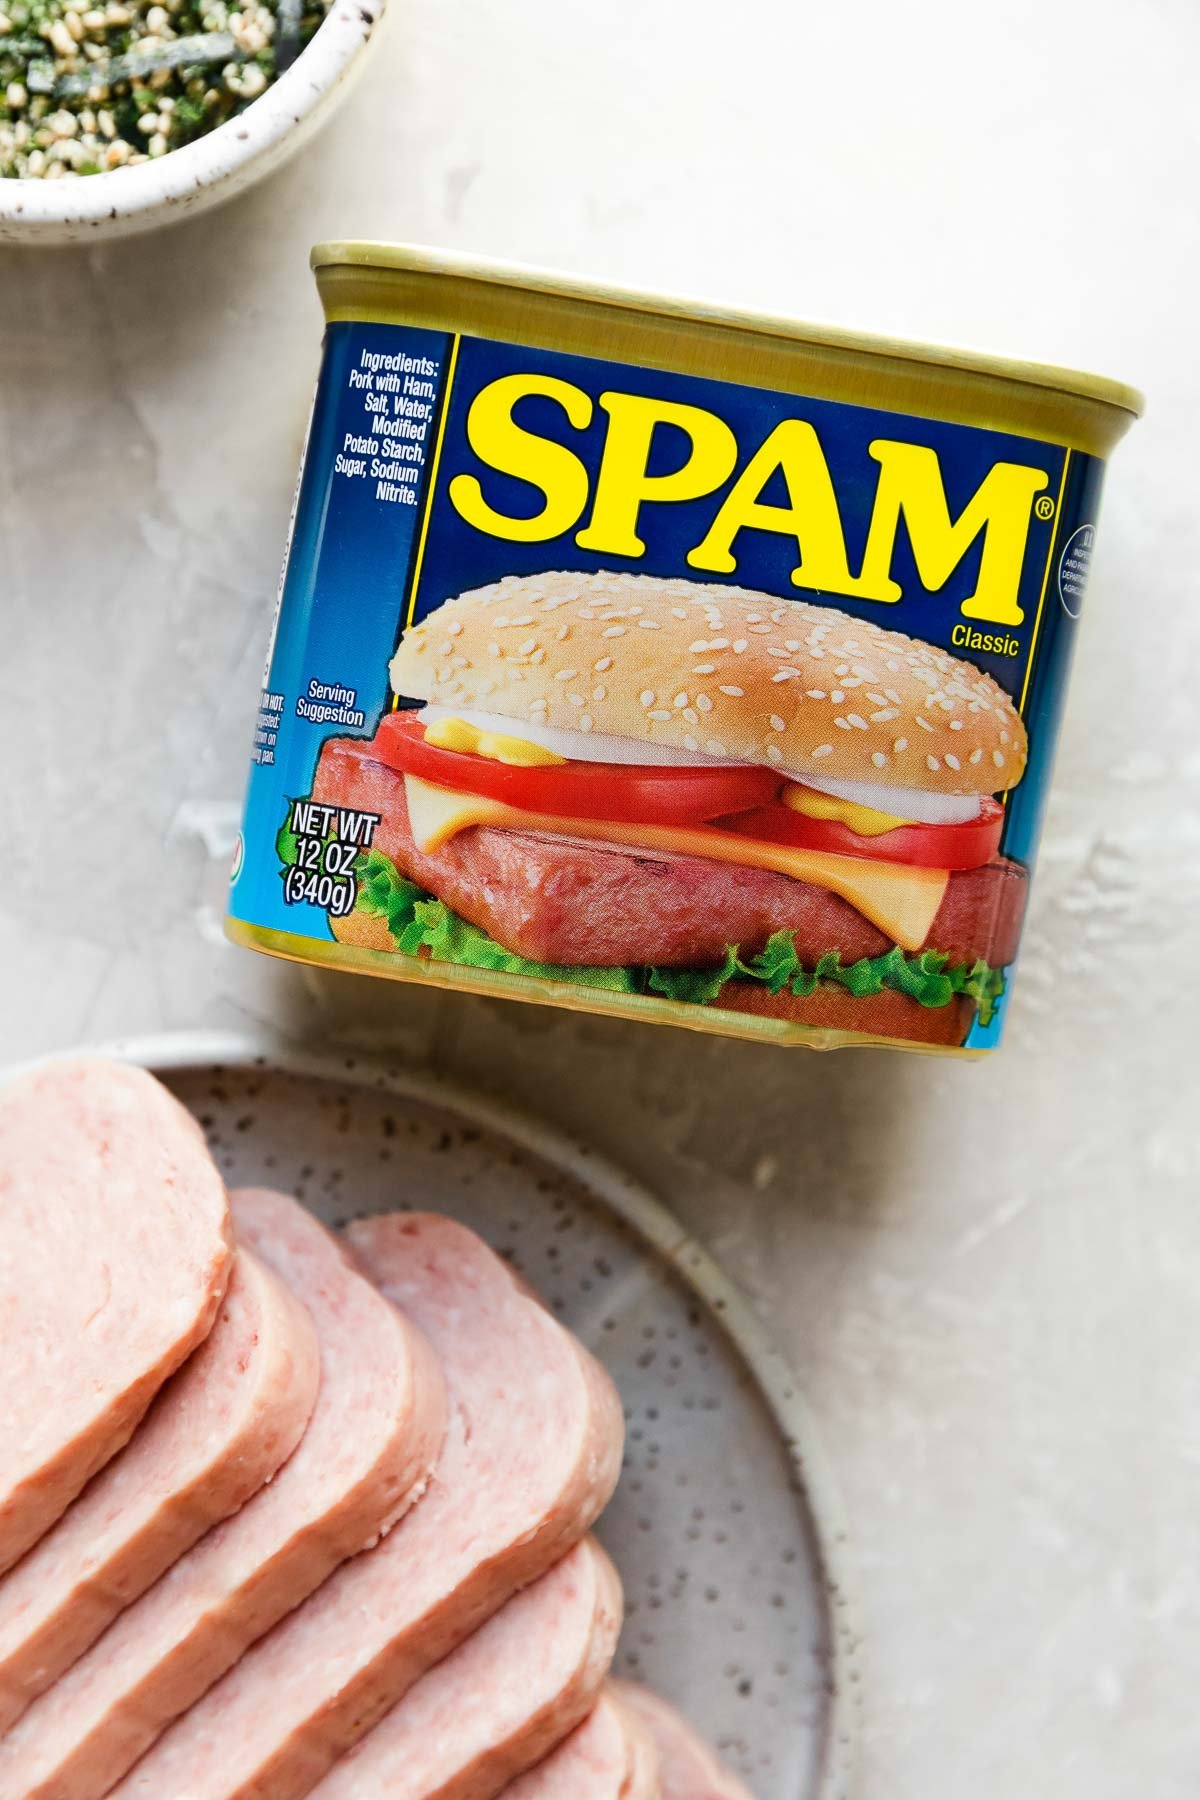 A can of Spam lays flat with the label facing upwards on a creamy white textured surface. A small ceramic plate topped with sliced pieces of spam rests below the can while a small white speckled ceramic bowl filled with furikake seasoning sits above it.